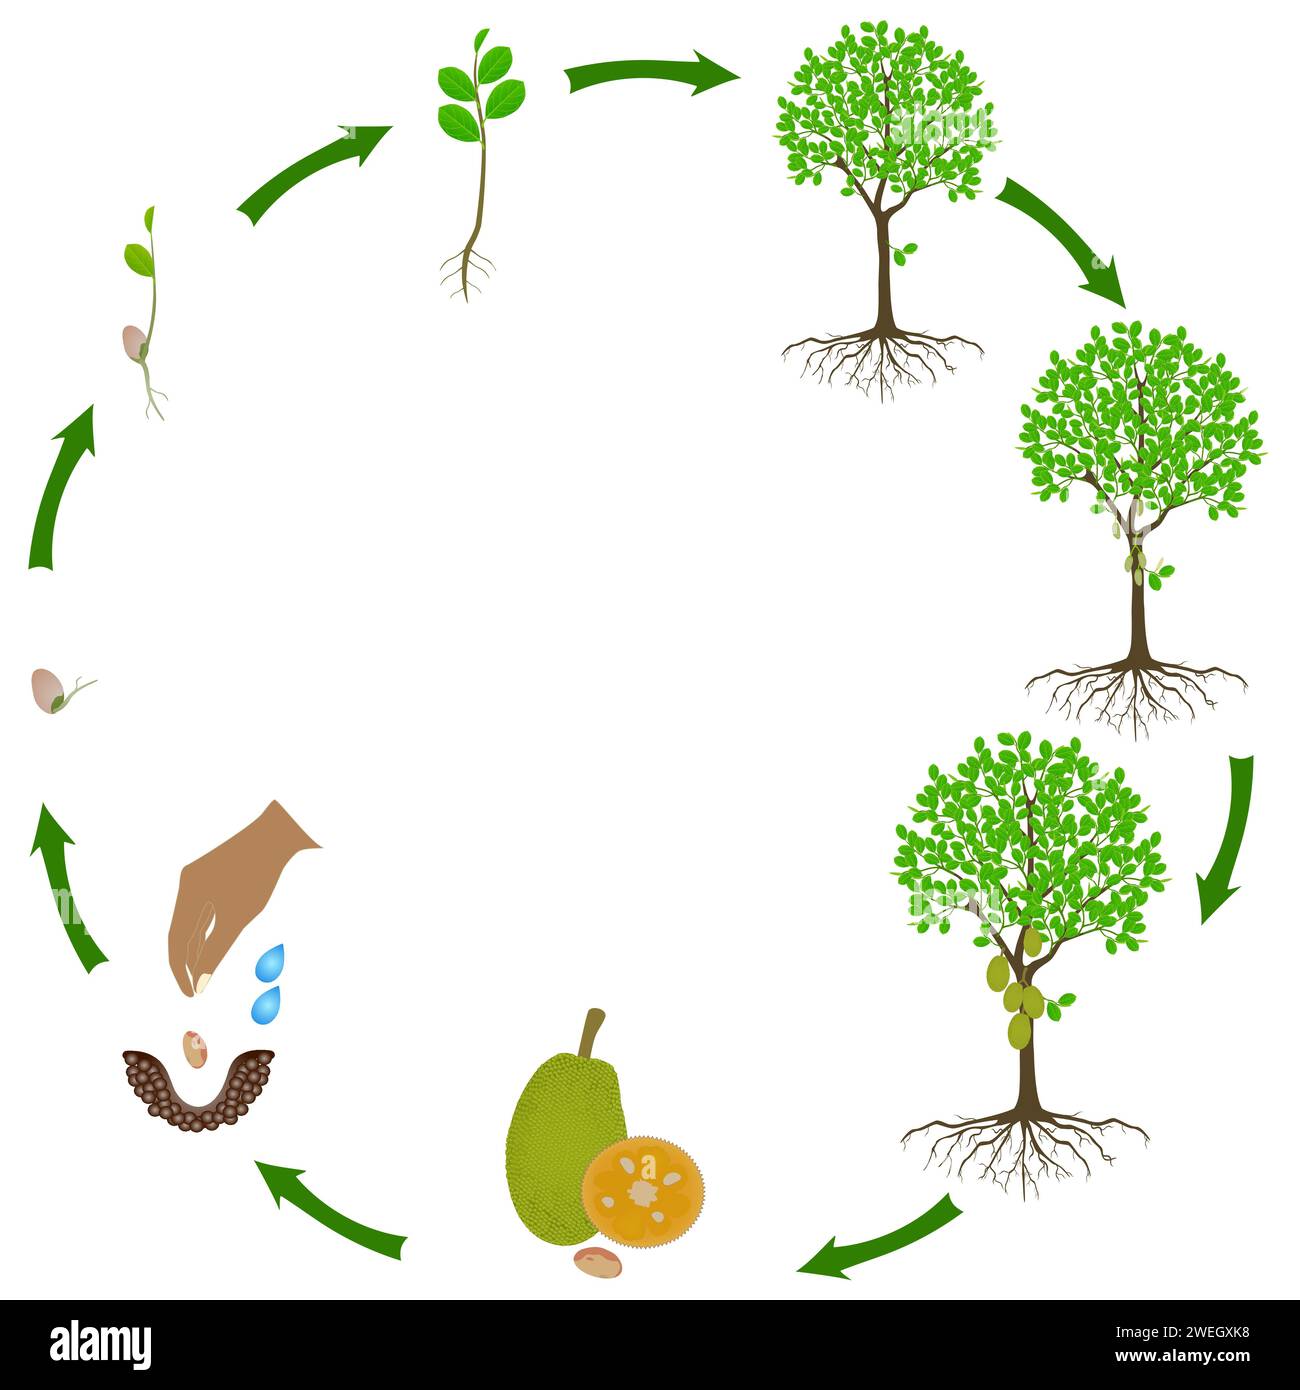 Life cycle of jackfruit tree on a white background. Stock Vector